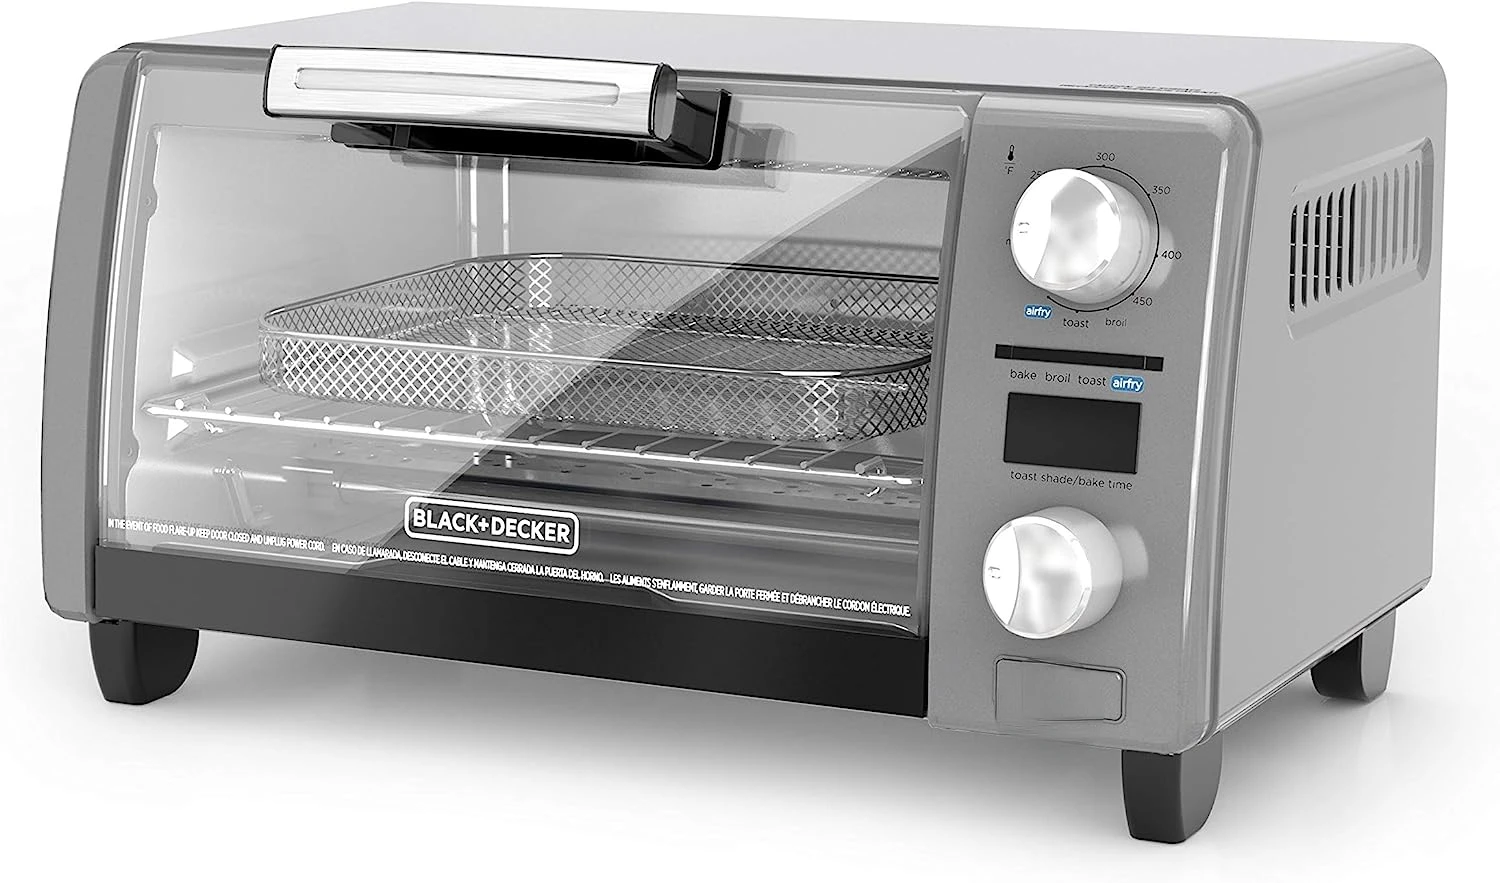 

Crisp N Bake Air Fry Digital Toaster Oven, 9" Pizza or 4 Slices of Bread, Gray